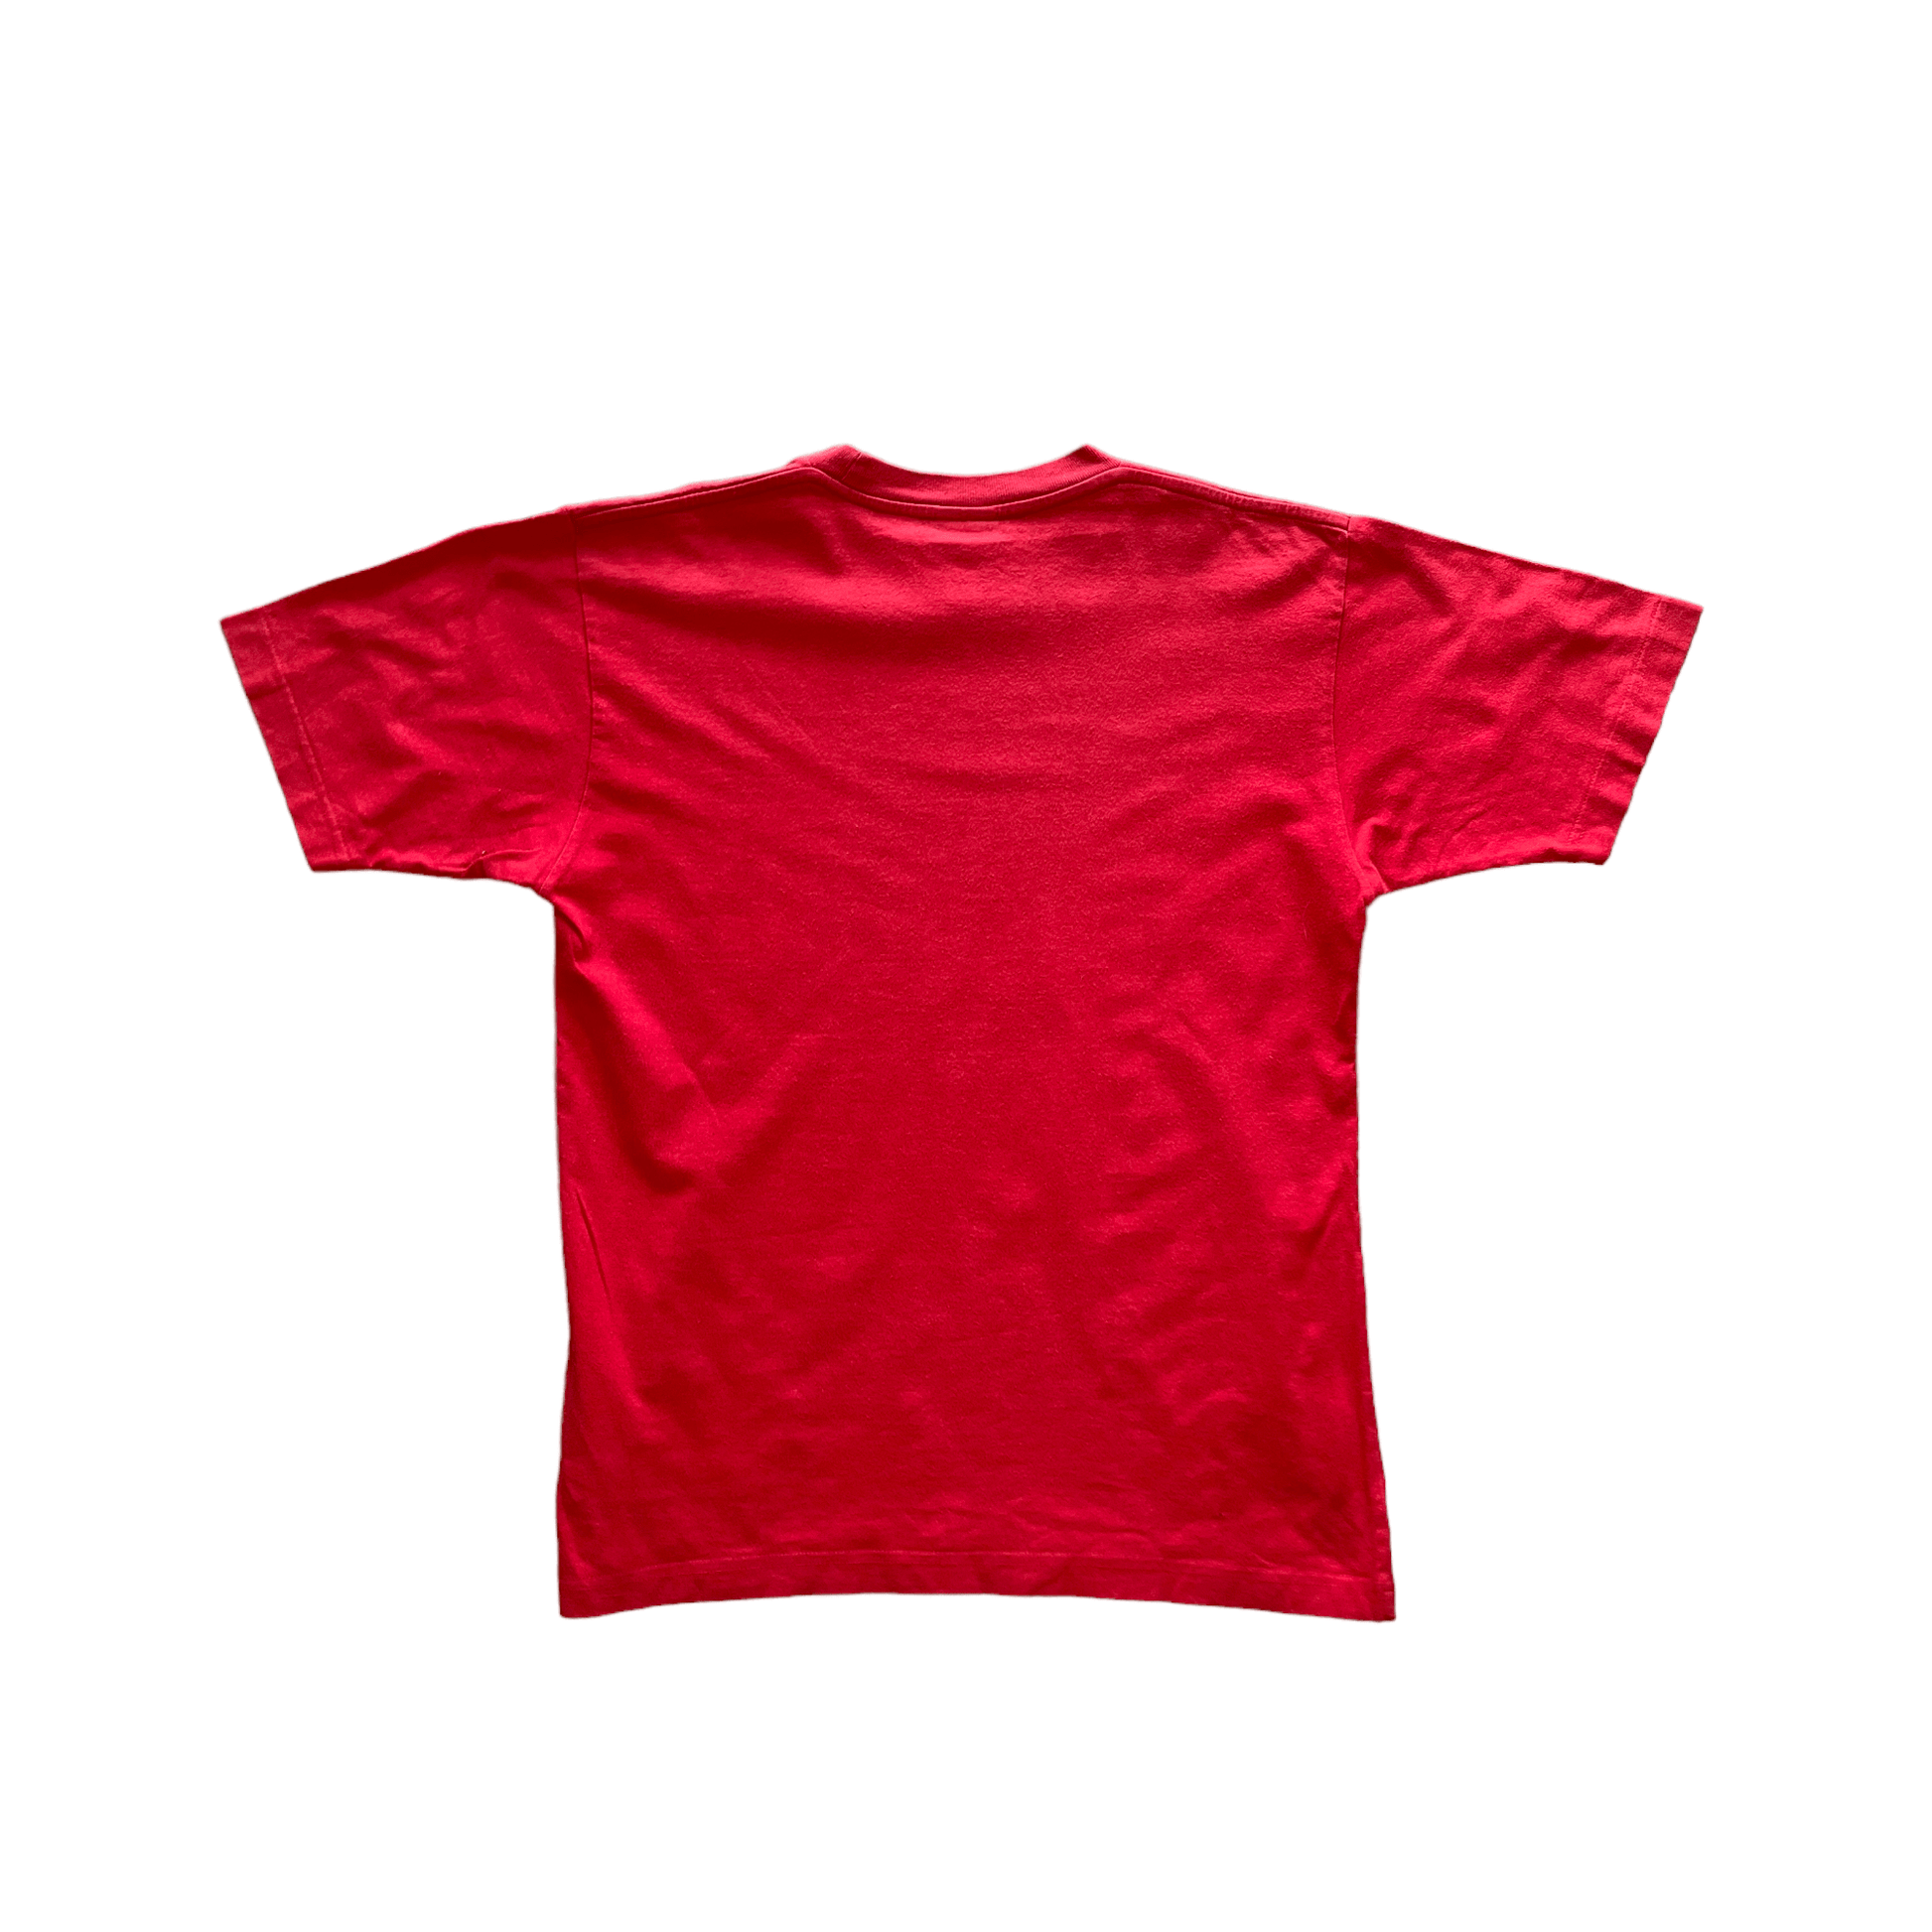 Vintage 90s Red Nike Tee - Recommended Size - Small - The Streetwear Studio